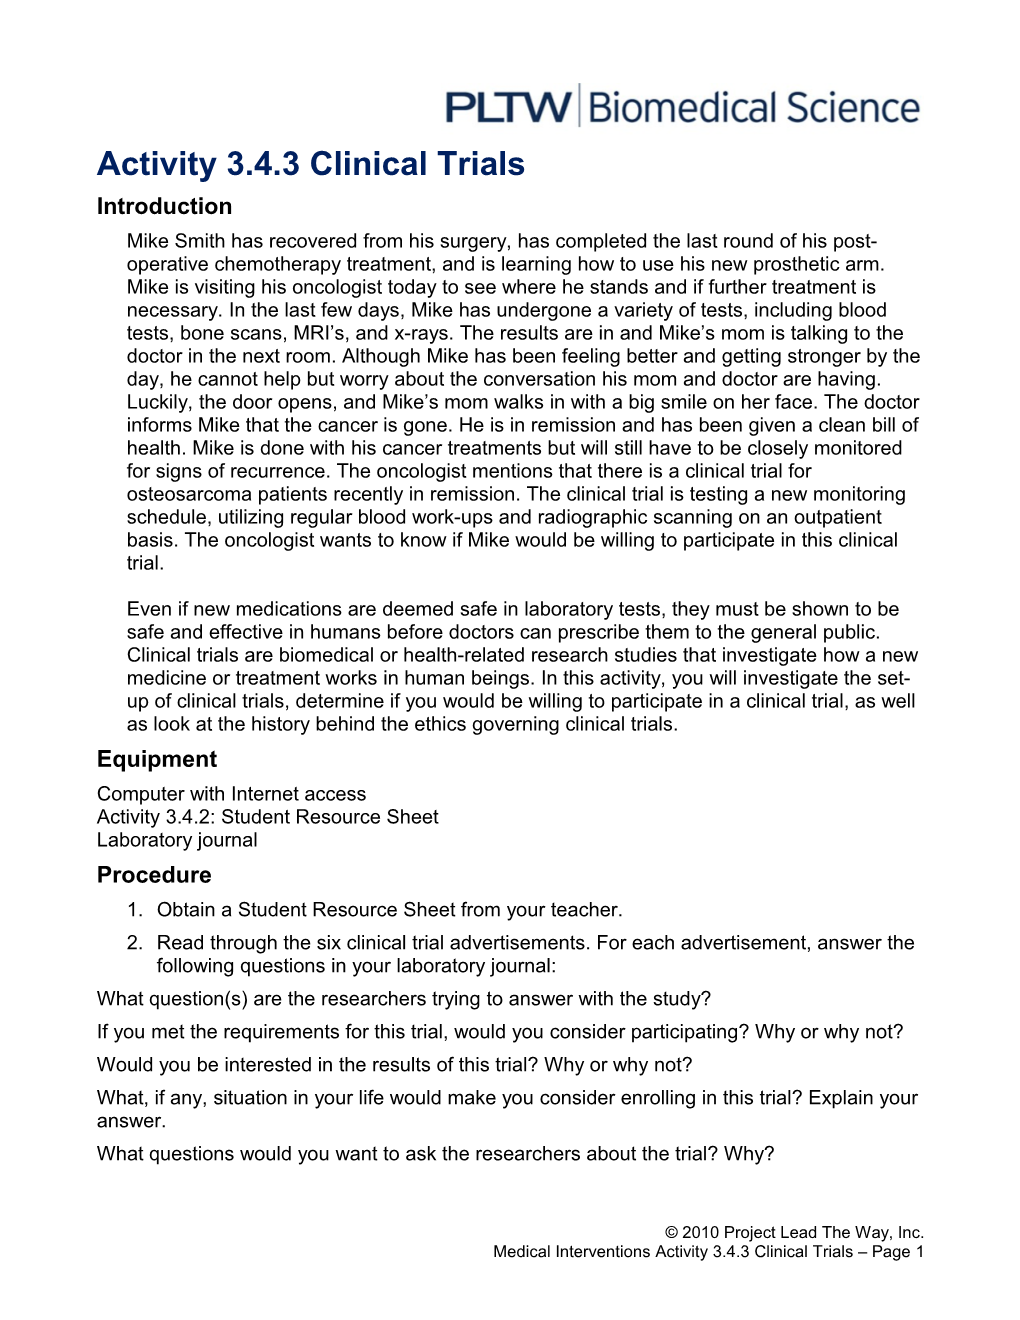 Activity 3.4.3 Clinical Trials